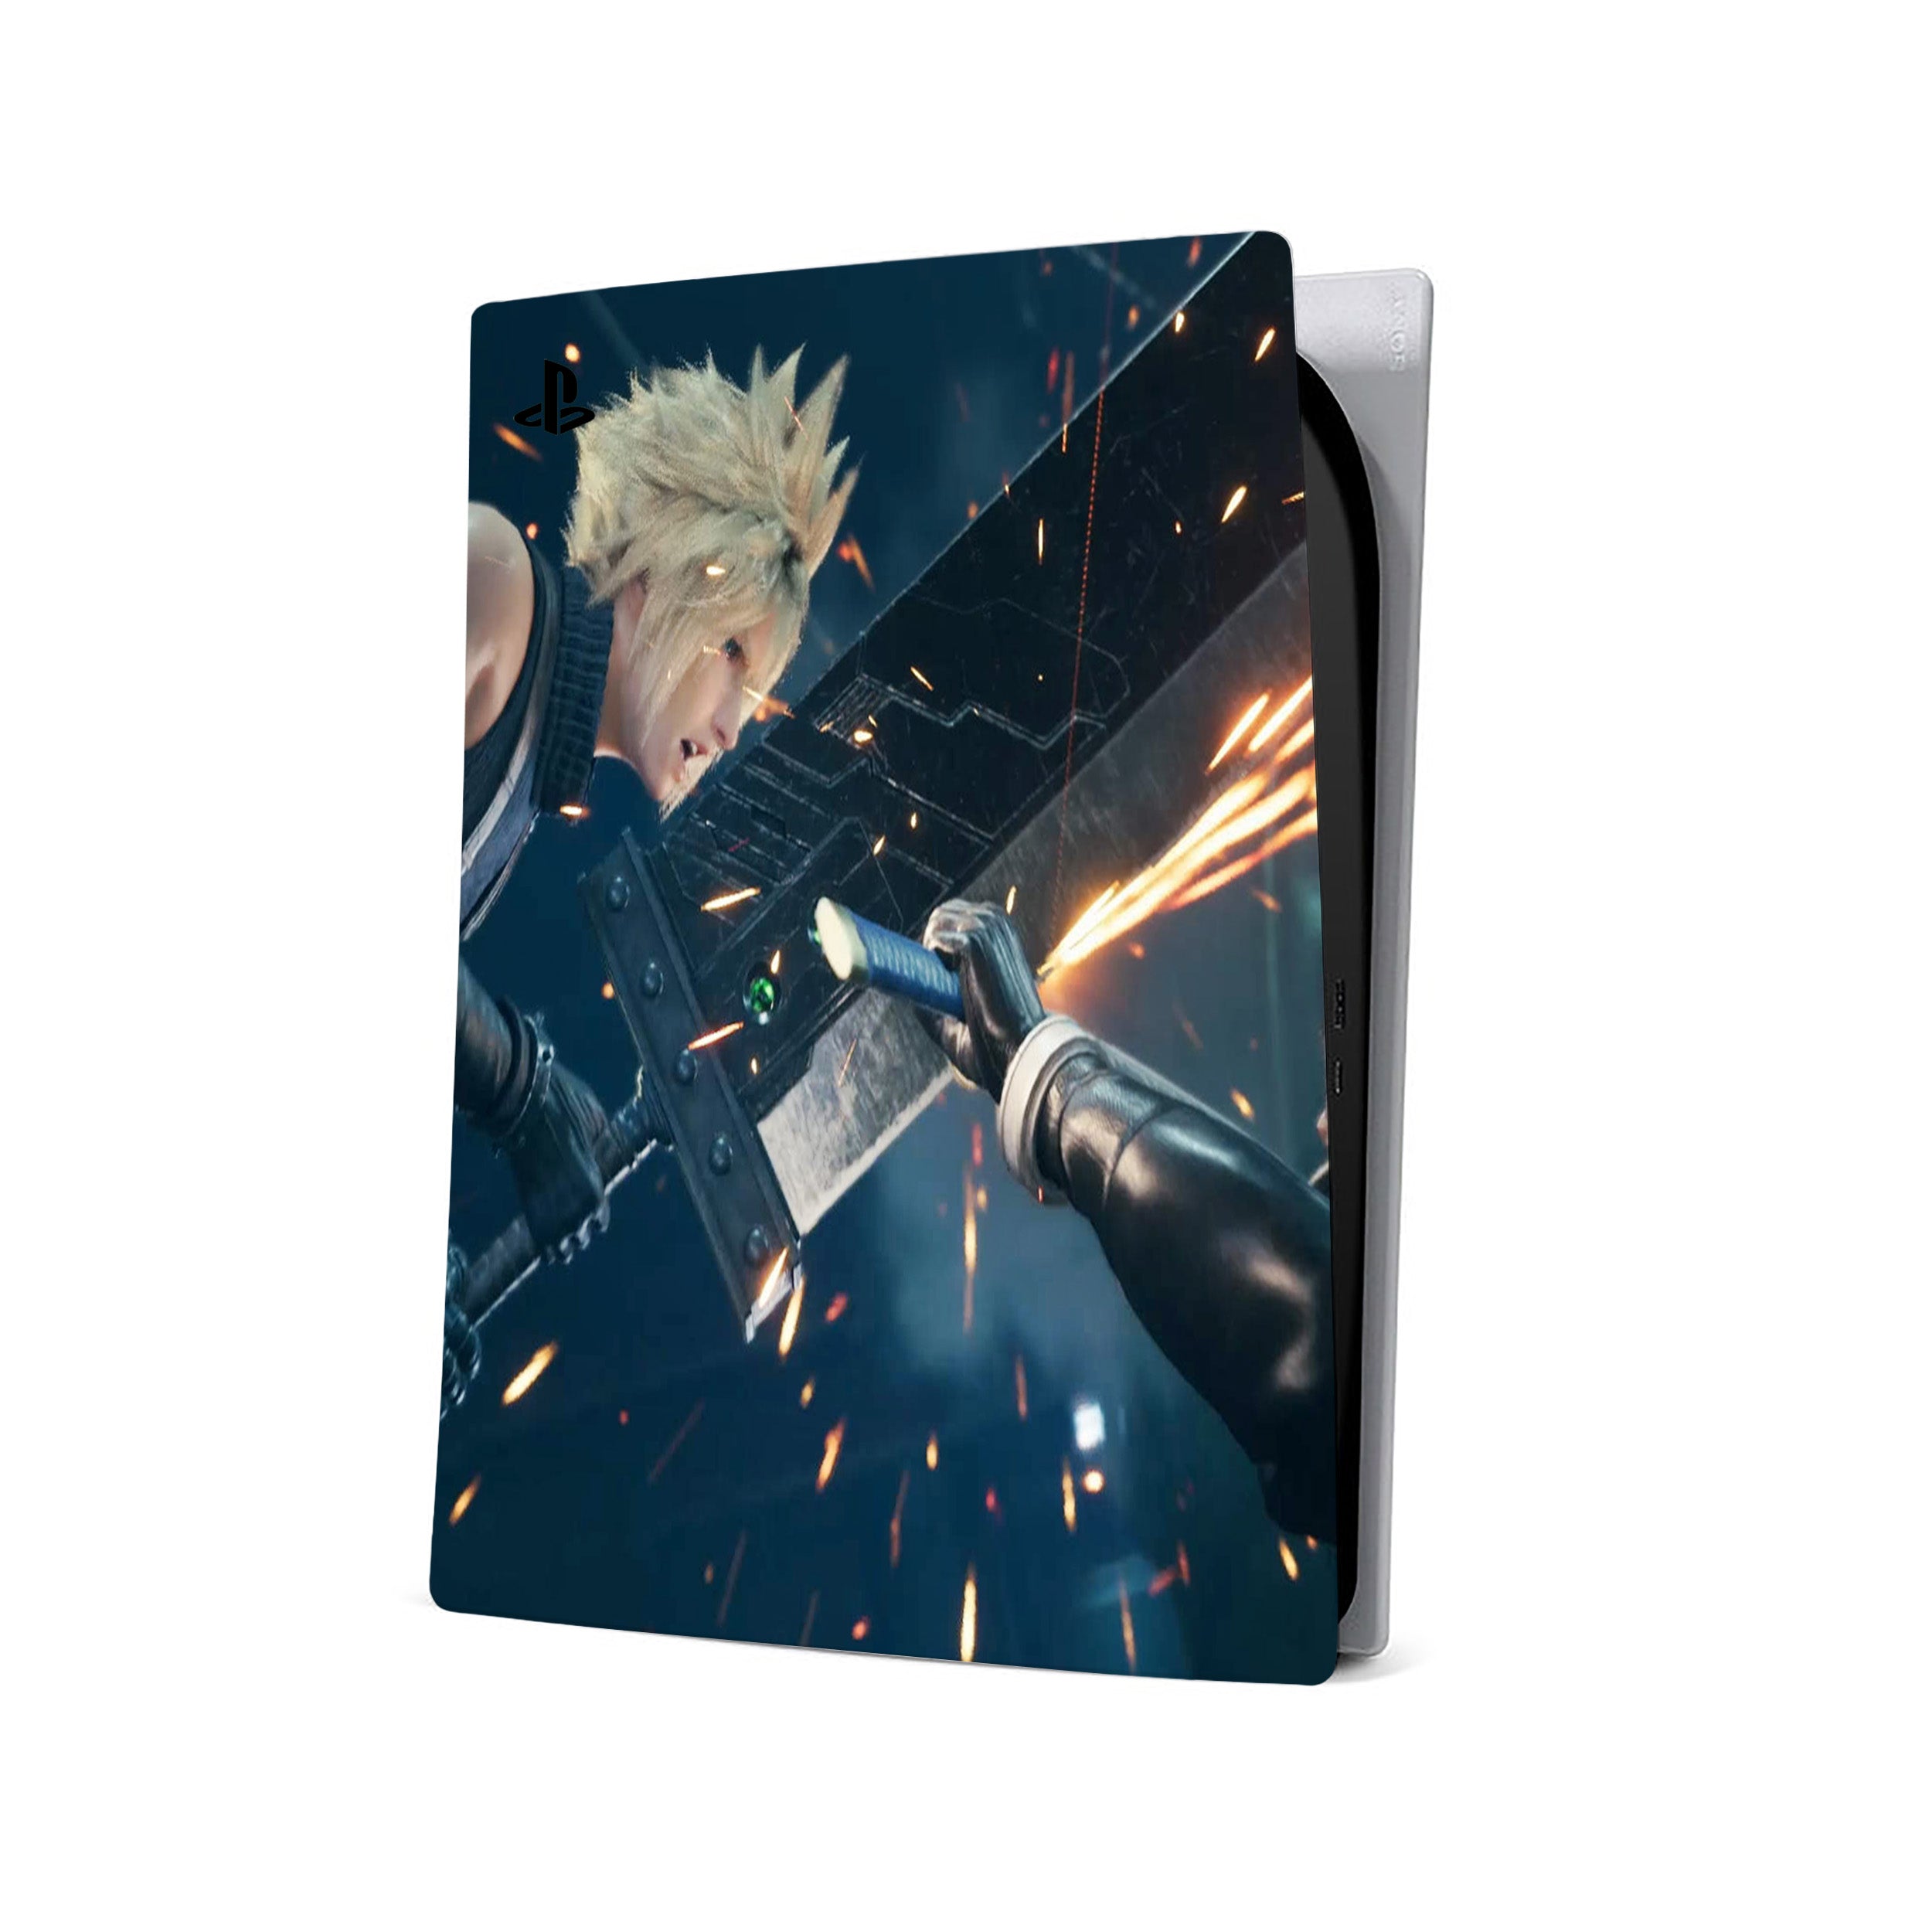 A video game skin featuring a Final Fantasy 7 Cloud vs Sephiroth design for the PS5.